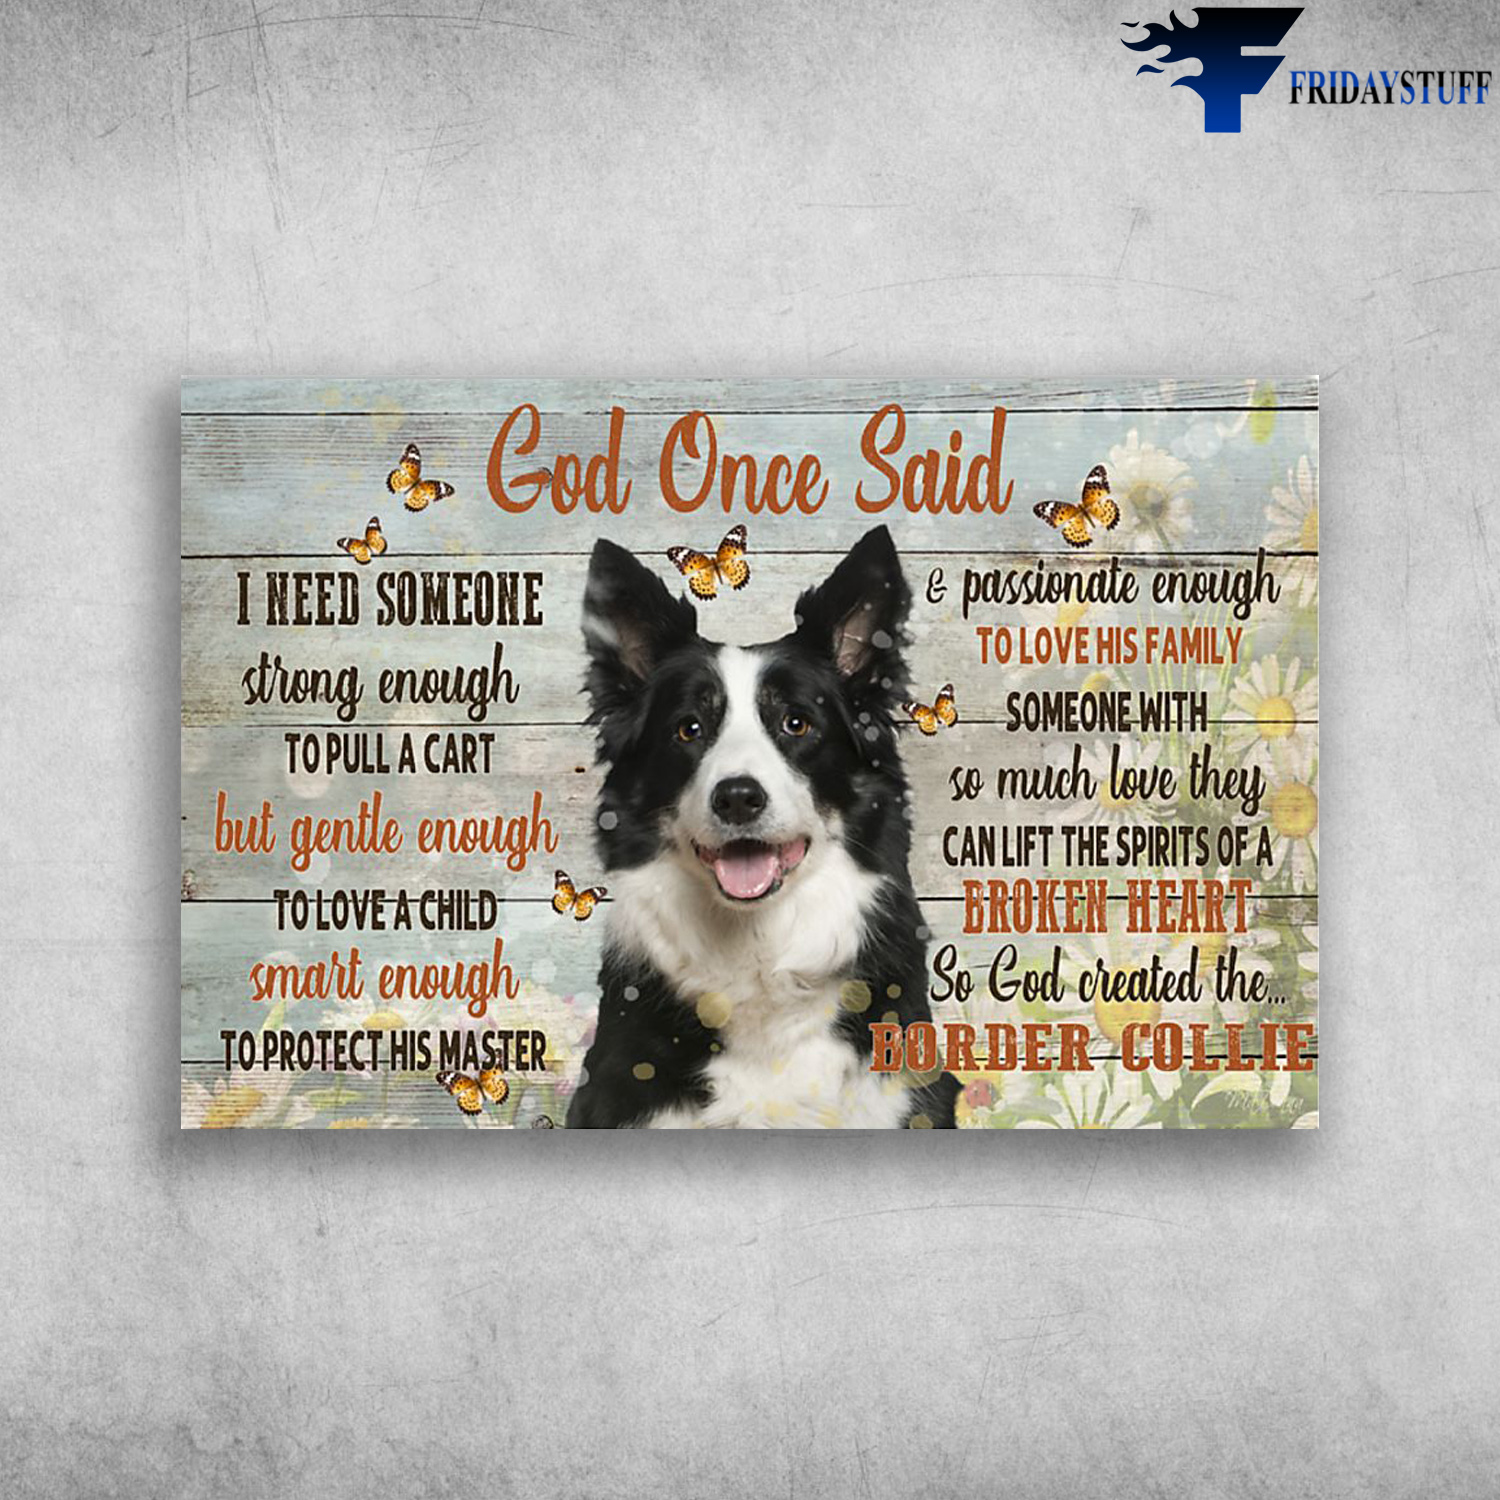 Corder Collie - God Once Said, I Need Someone Strong Enough To Pull A Cart, But Gentle Enough To Love A CHild, Smart Enough To Protect His Master, Passionate Enough To Love His Family